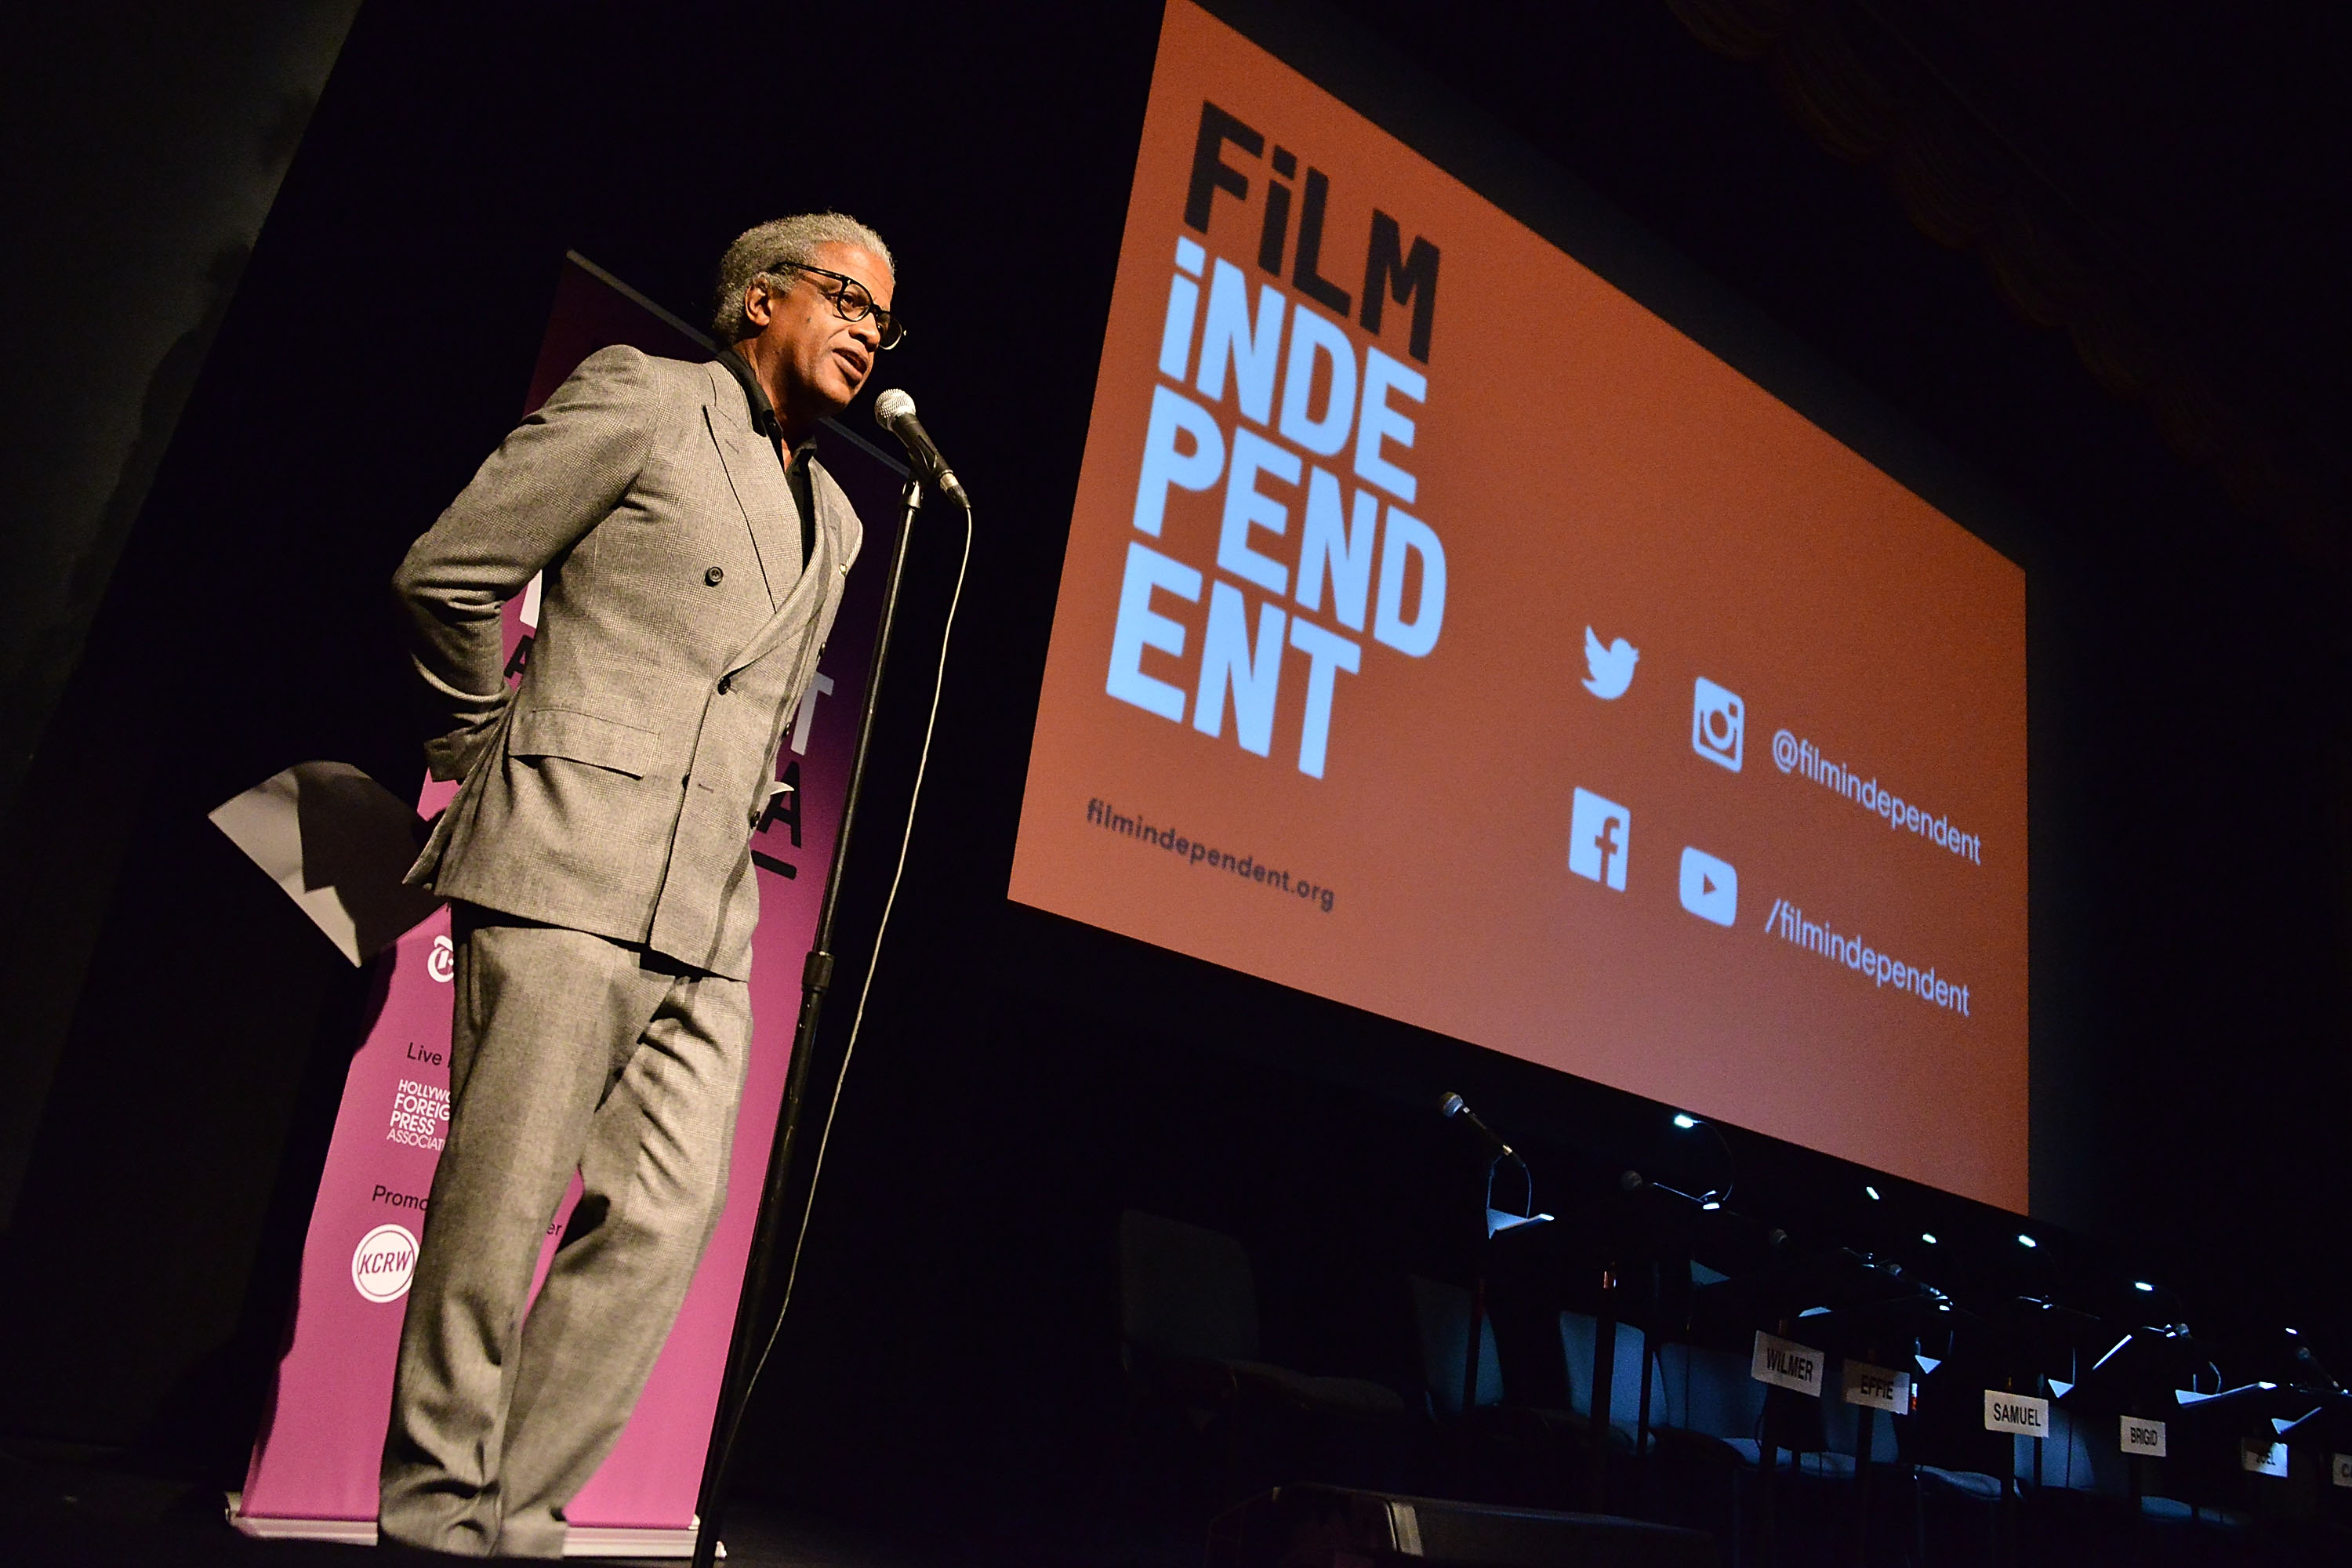 LOS ANGELES, CA - FEBRUARY 18: Elvis Mitchell attends the Film Independent at LACMA Live Read with guest director Laurence Fishburne at Bing Theatre At LACMA on February 18, 2016 in Los Angeles, California. (Photo by Araya Diaz/WireImage)